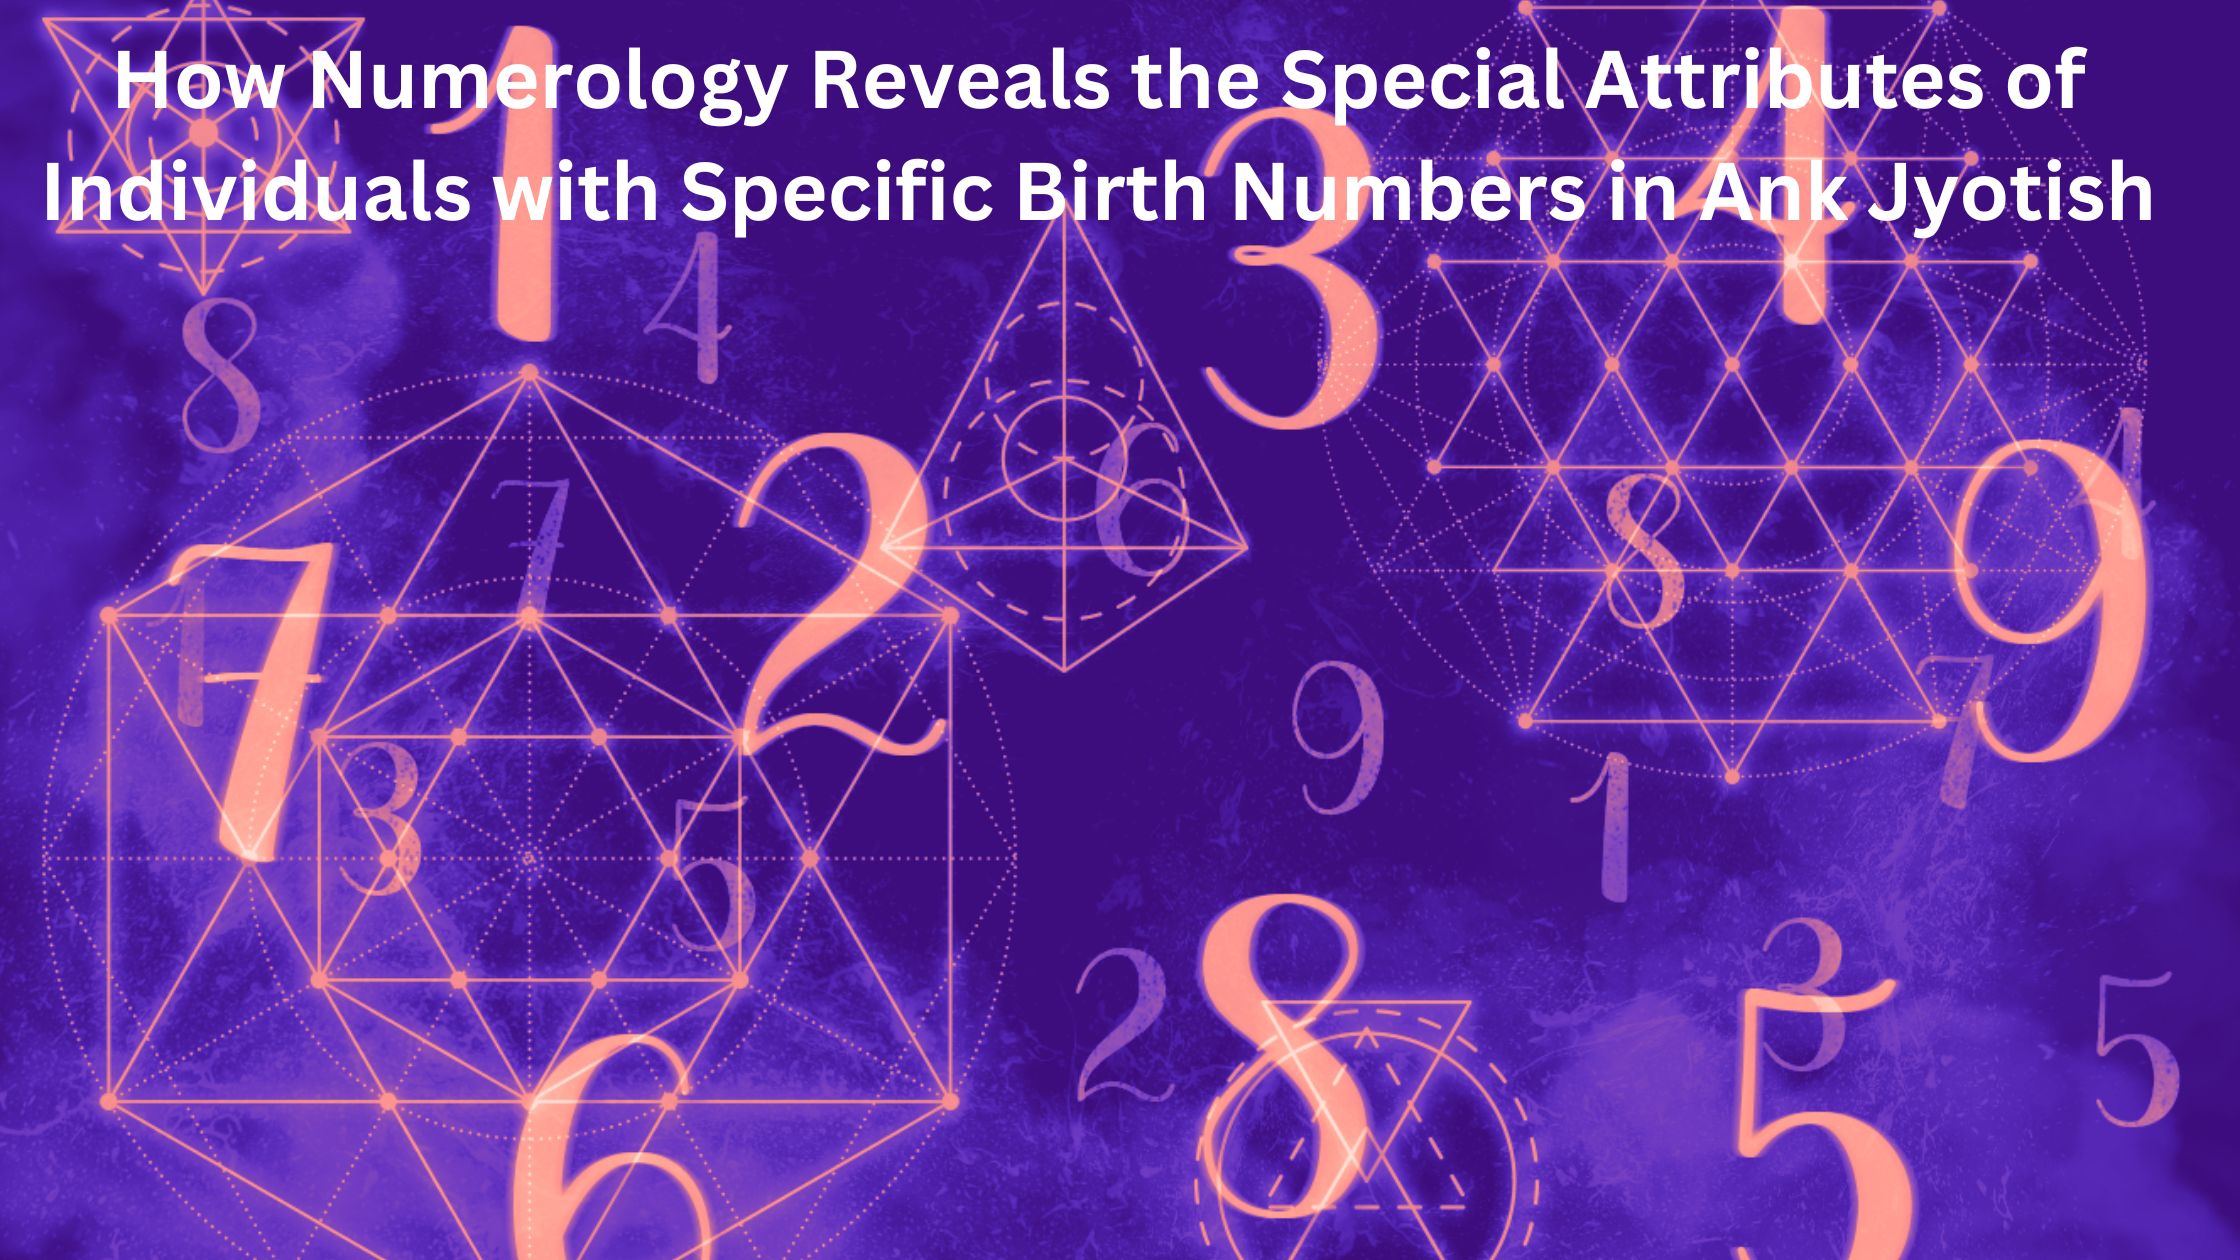 How Numerology Reveals the Special Attributes of Individuals